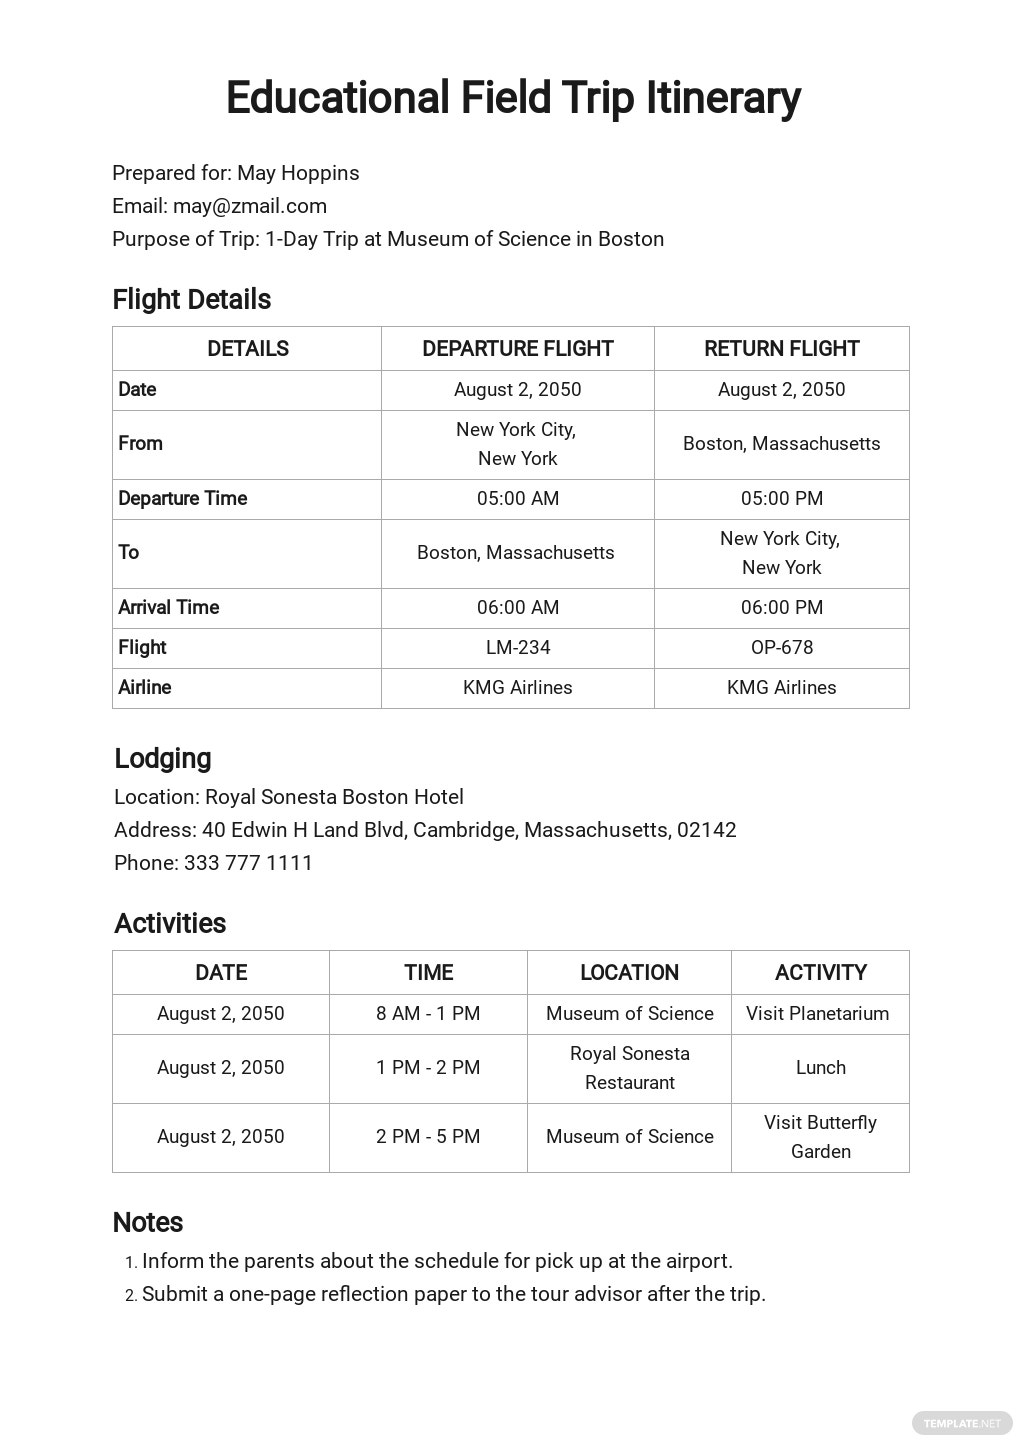 FREE Itinerary Templates in Apple (MAC) Pages  Template Regarding Leisure Travel Itinerary Template